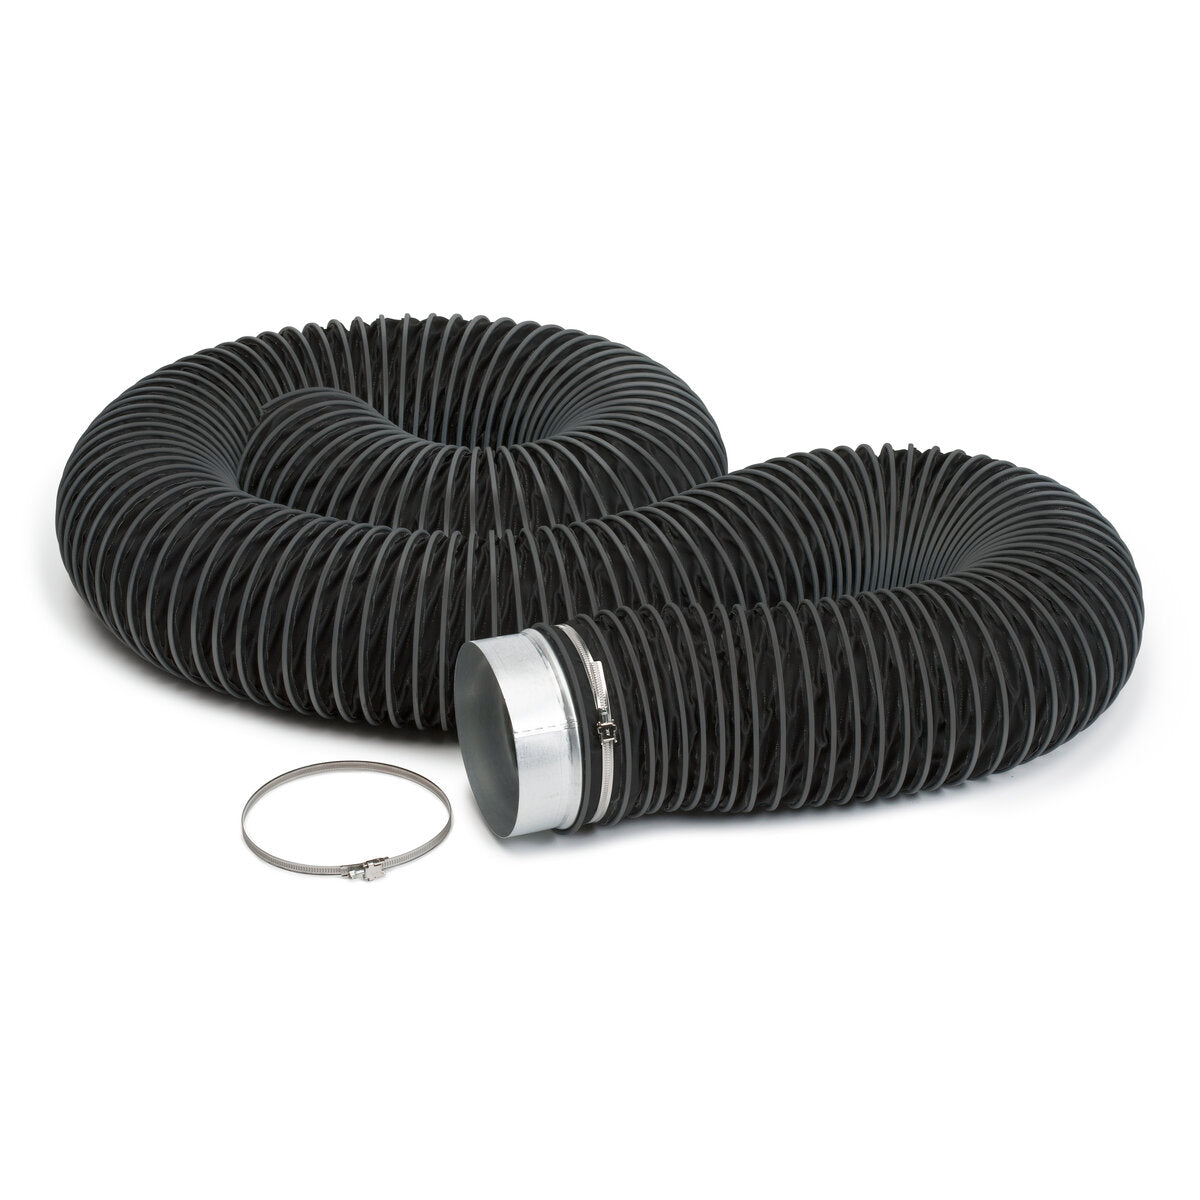 Lincoln Electric - Exhaust or Extension Hose Set - 16 ft (5 m) - K1668-2